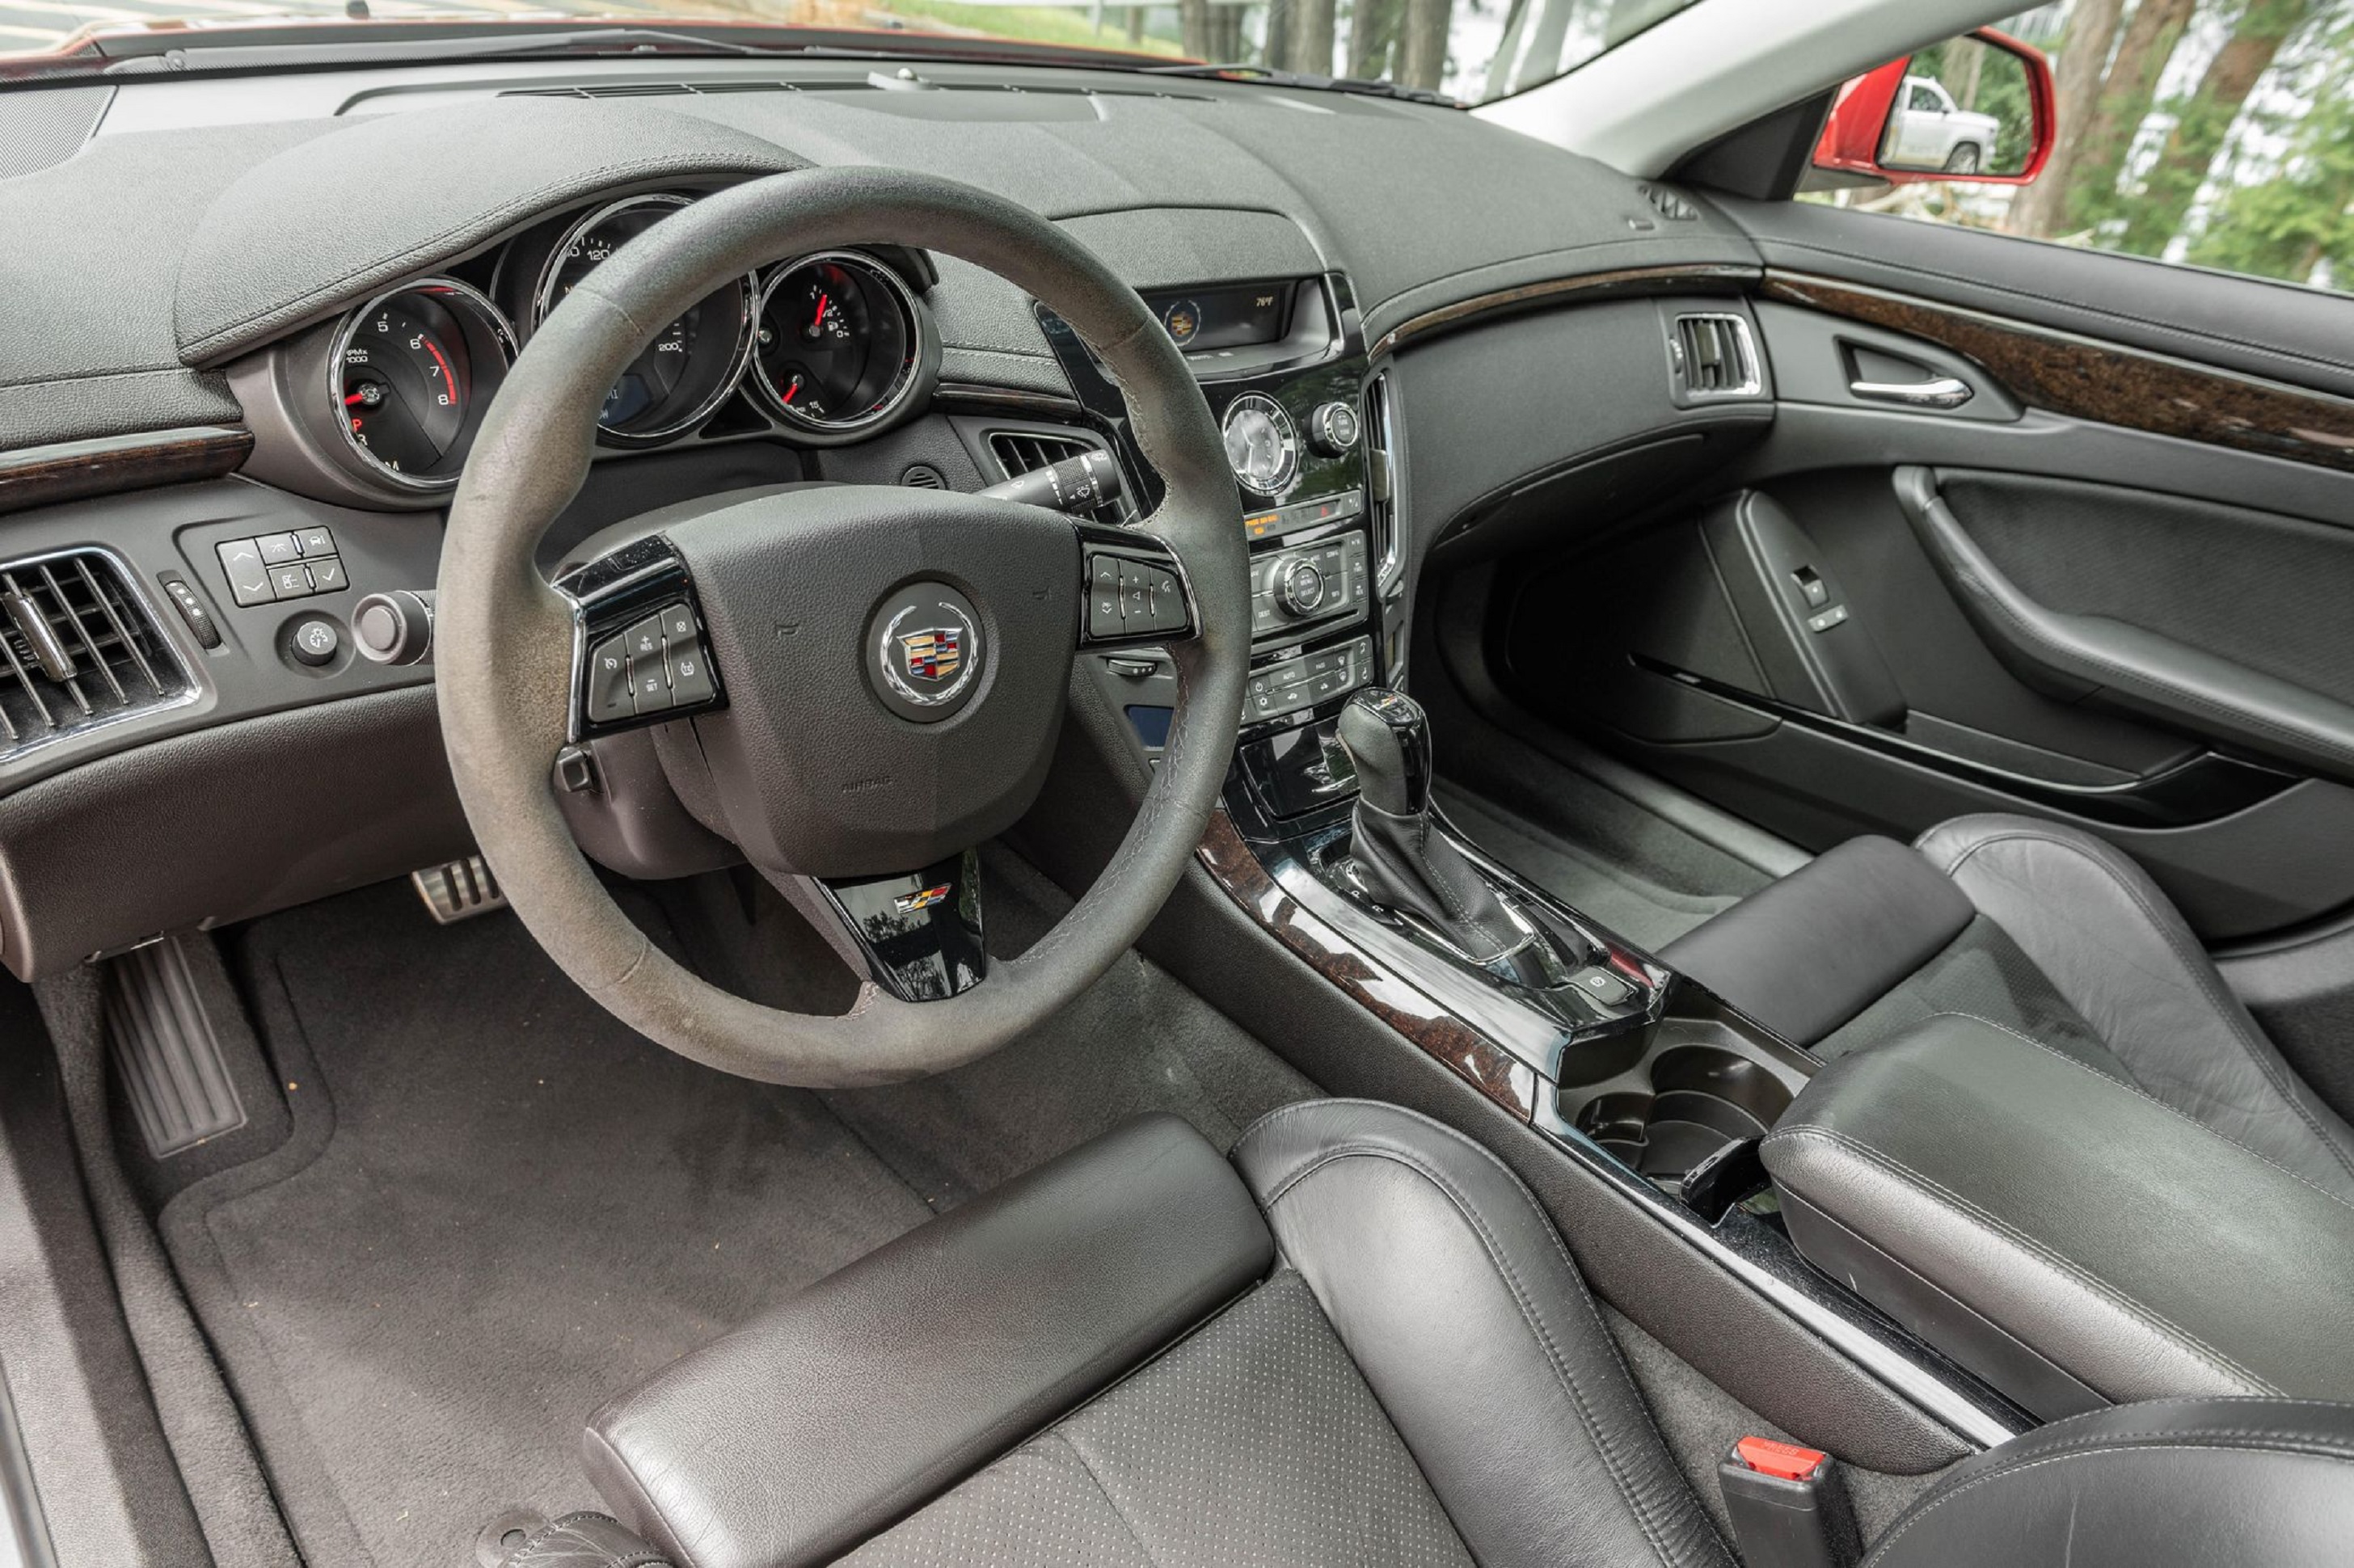 The black-leather front Recaro seats and black dashboard of a 2011 Cadillac CTS-V Sedan